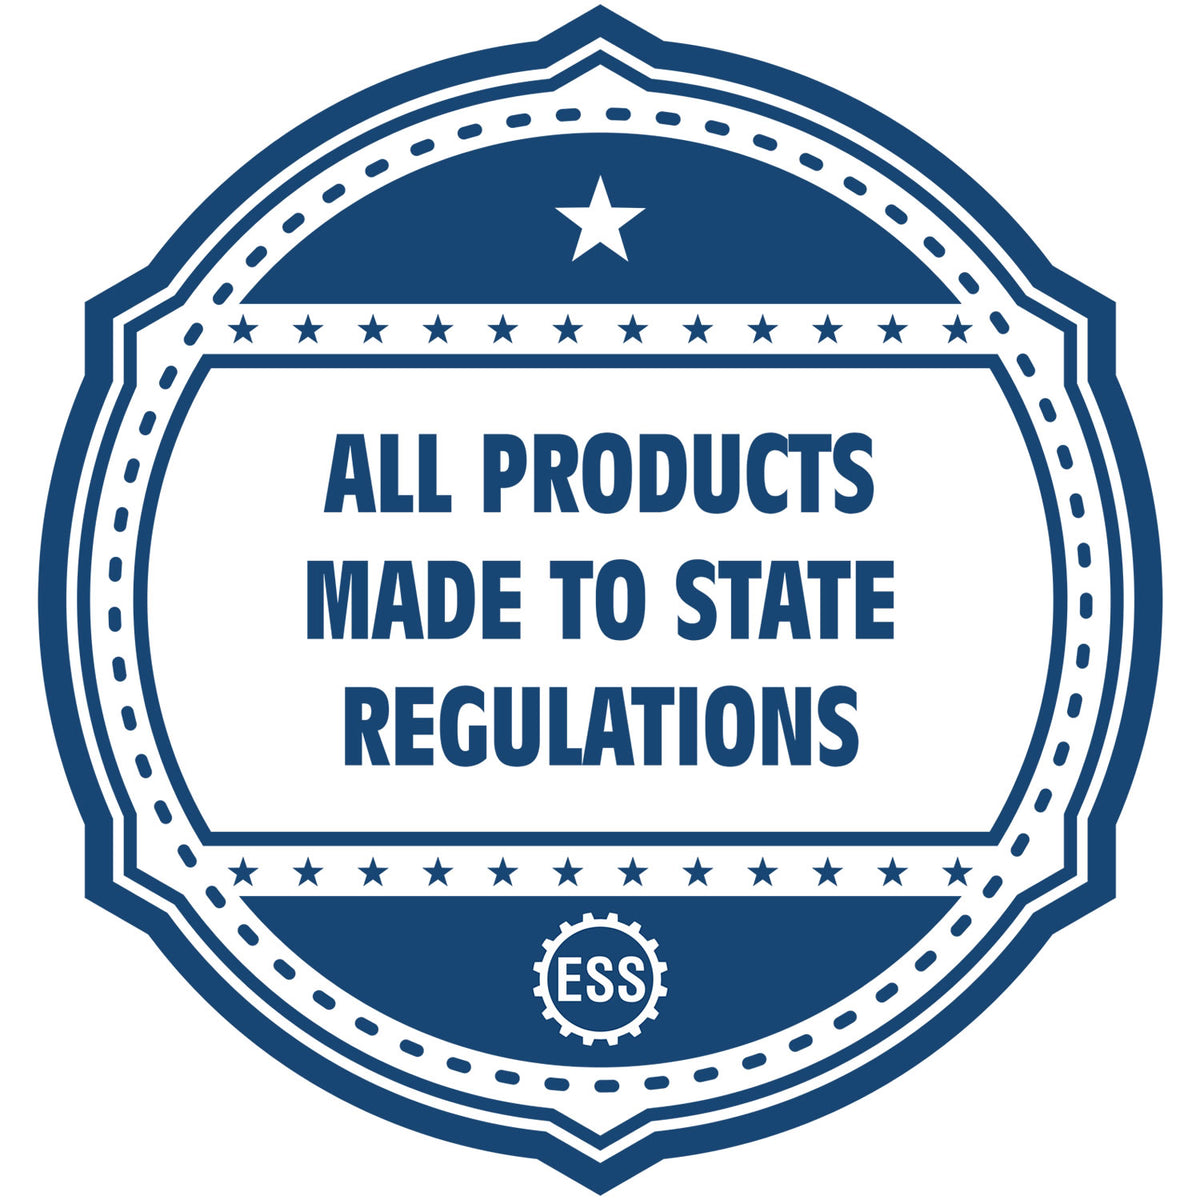 An icon or badge element for the State of South Dakota Soft Land Surveyor Embossing Seal showing that this product is made in compliance with state regulations.